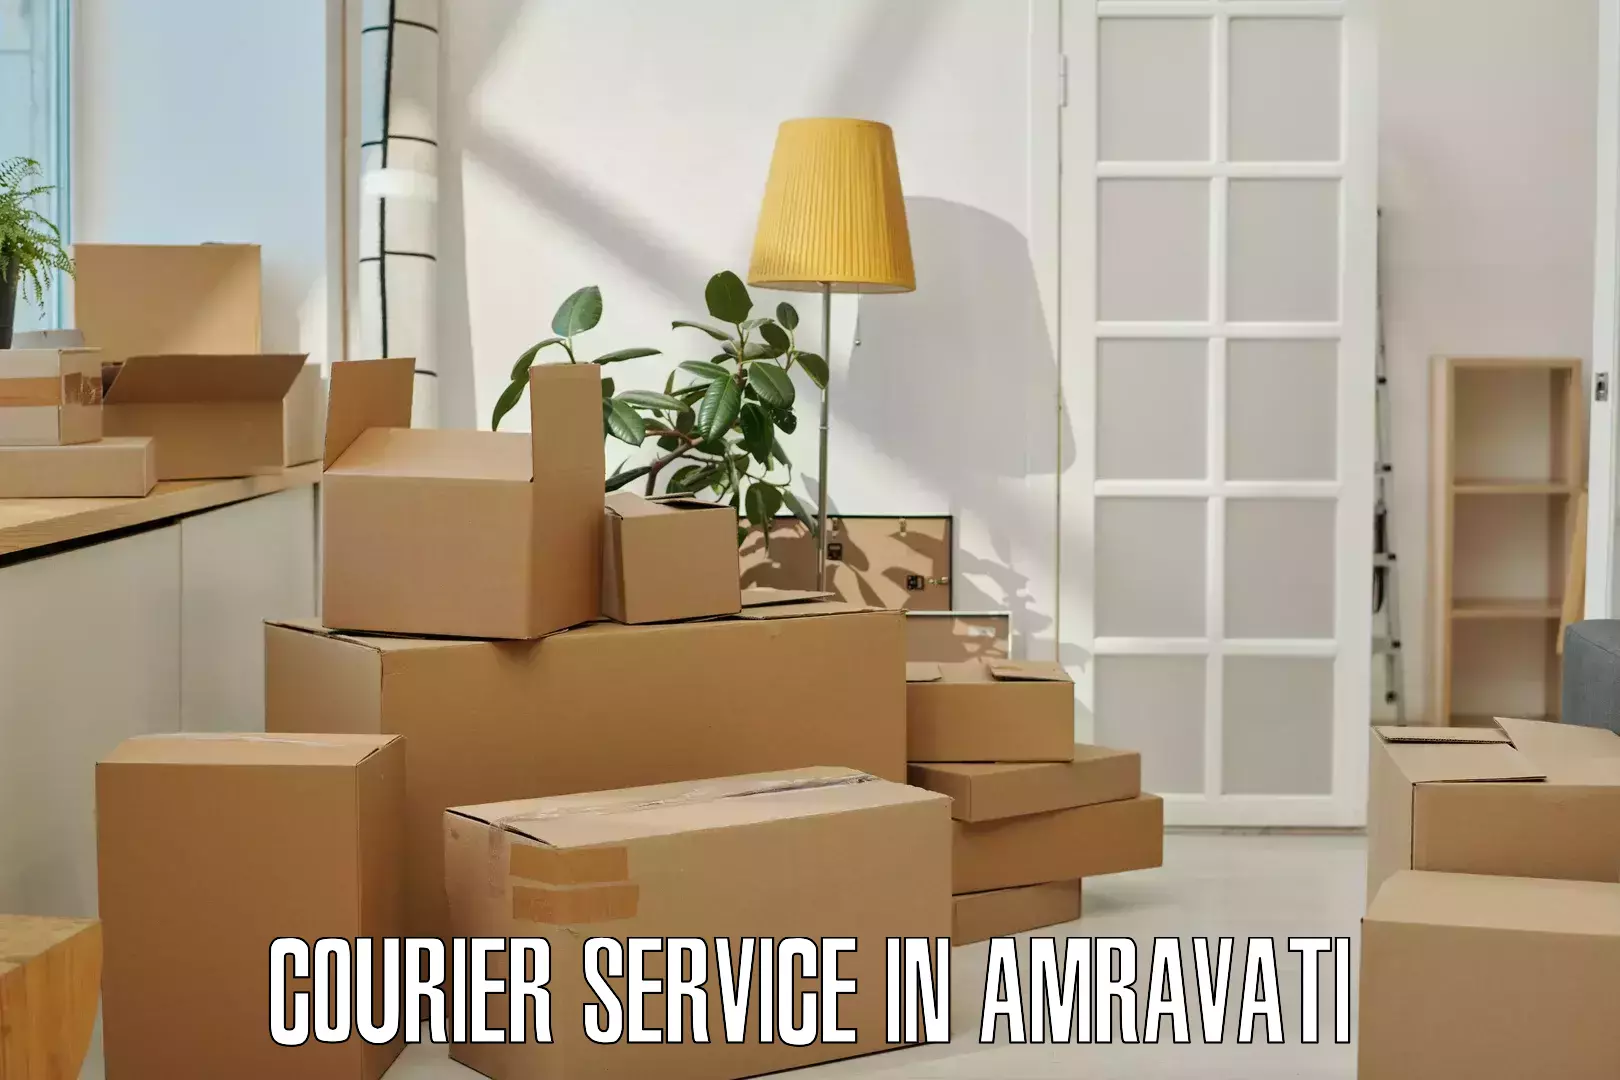 Round-the-clock parcel delivery in Amravati